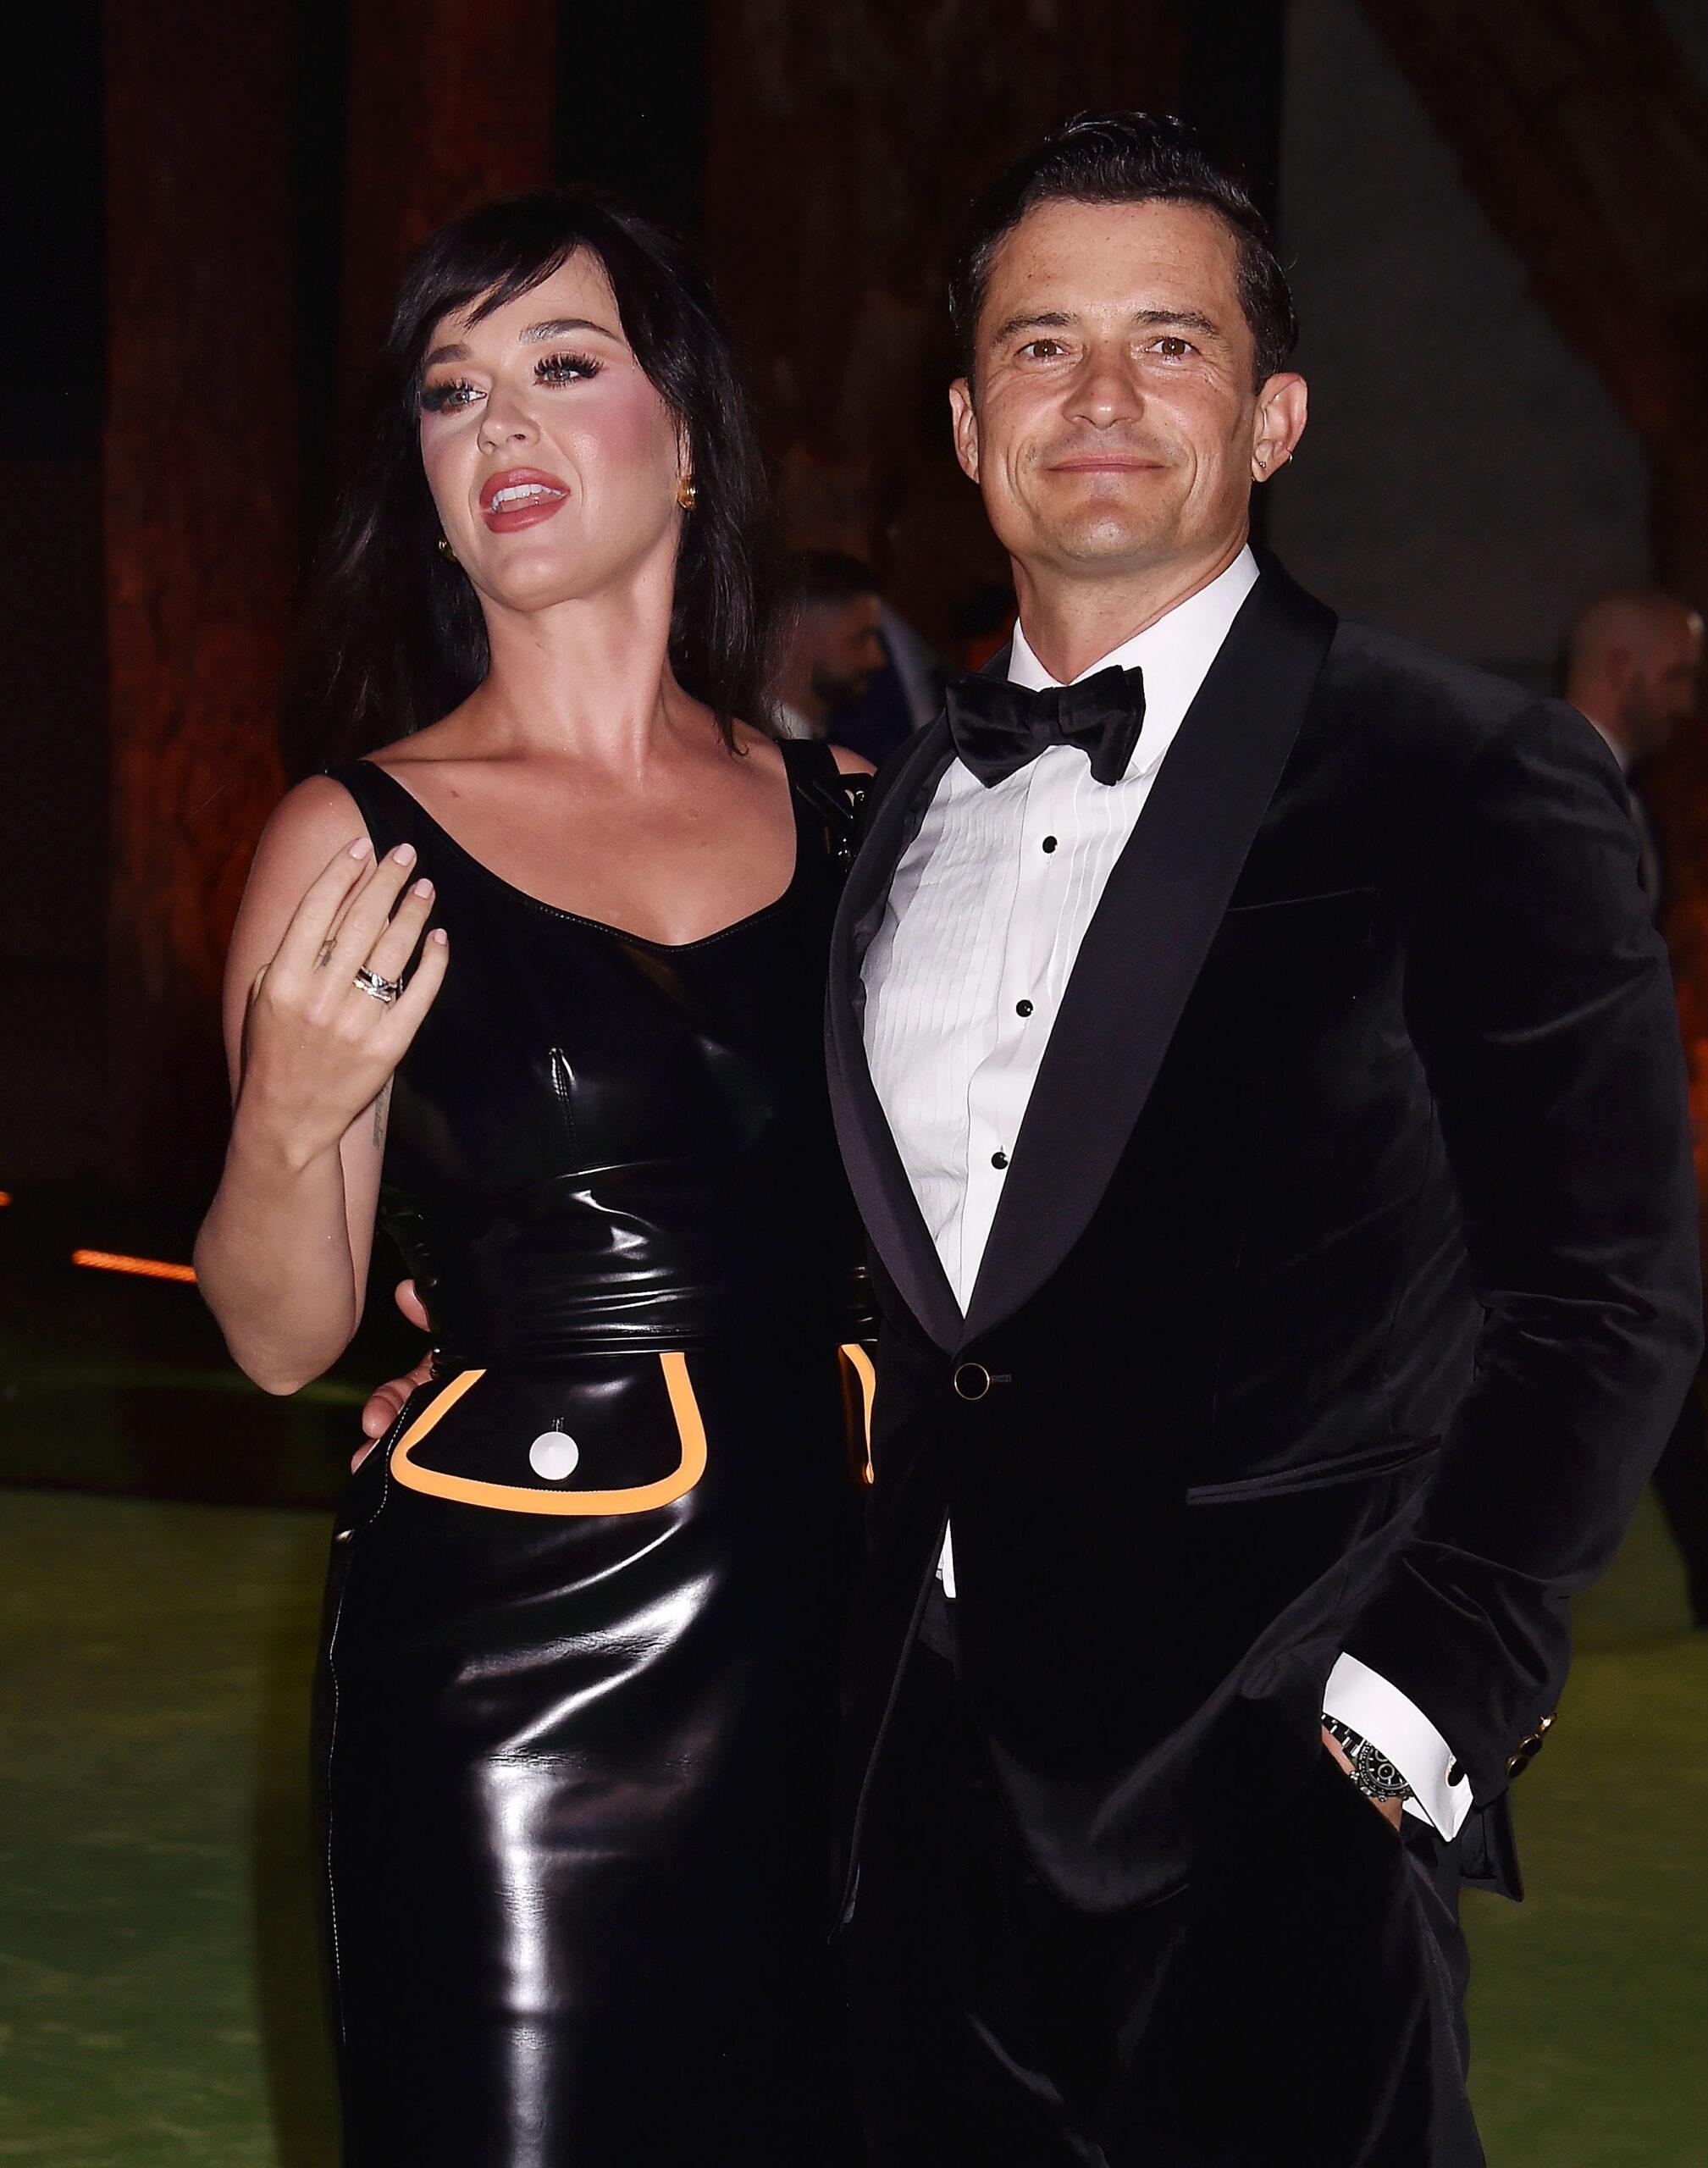 Katy Perry and Orlando Bloom smiling.